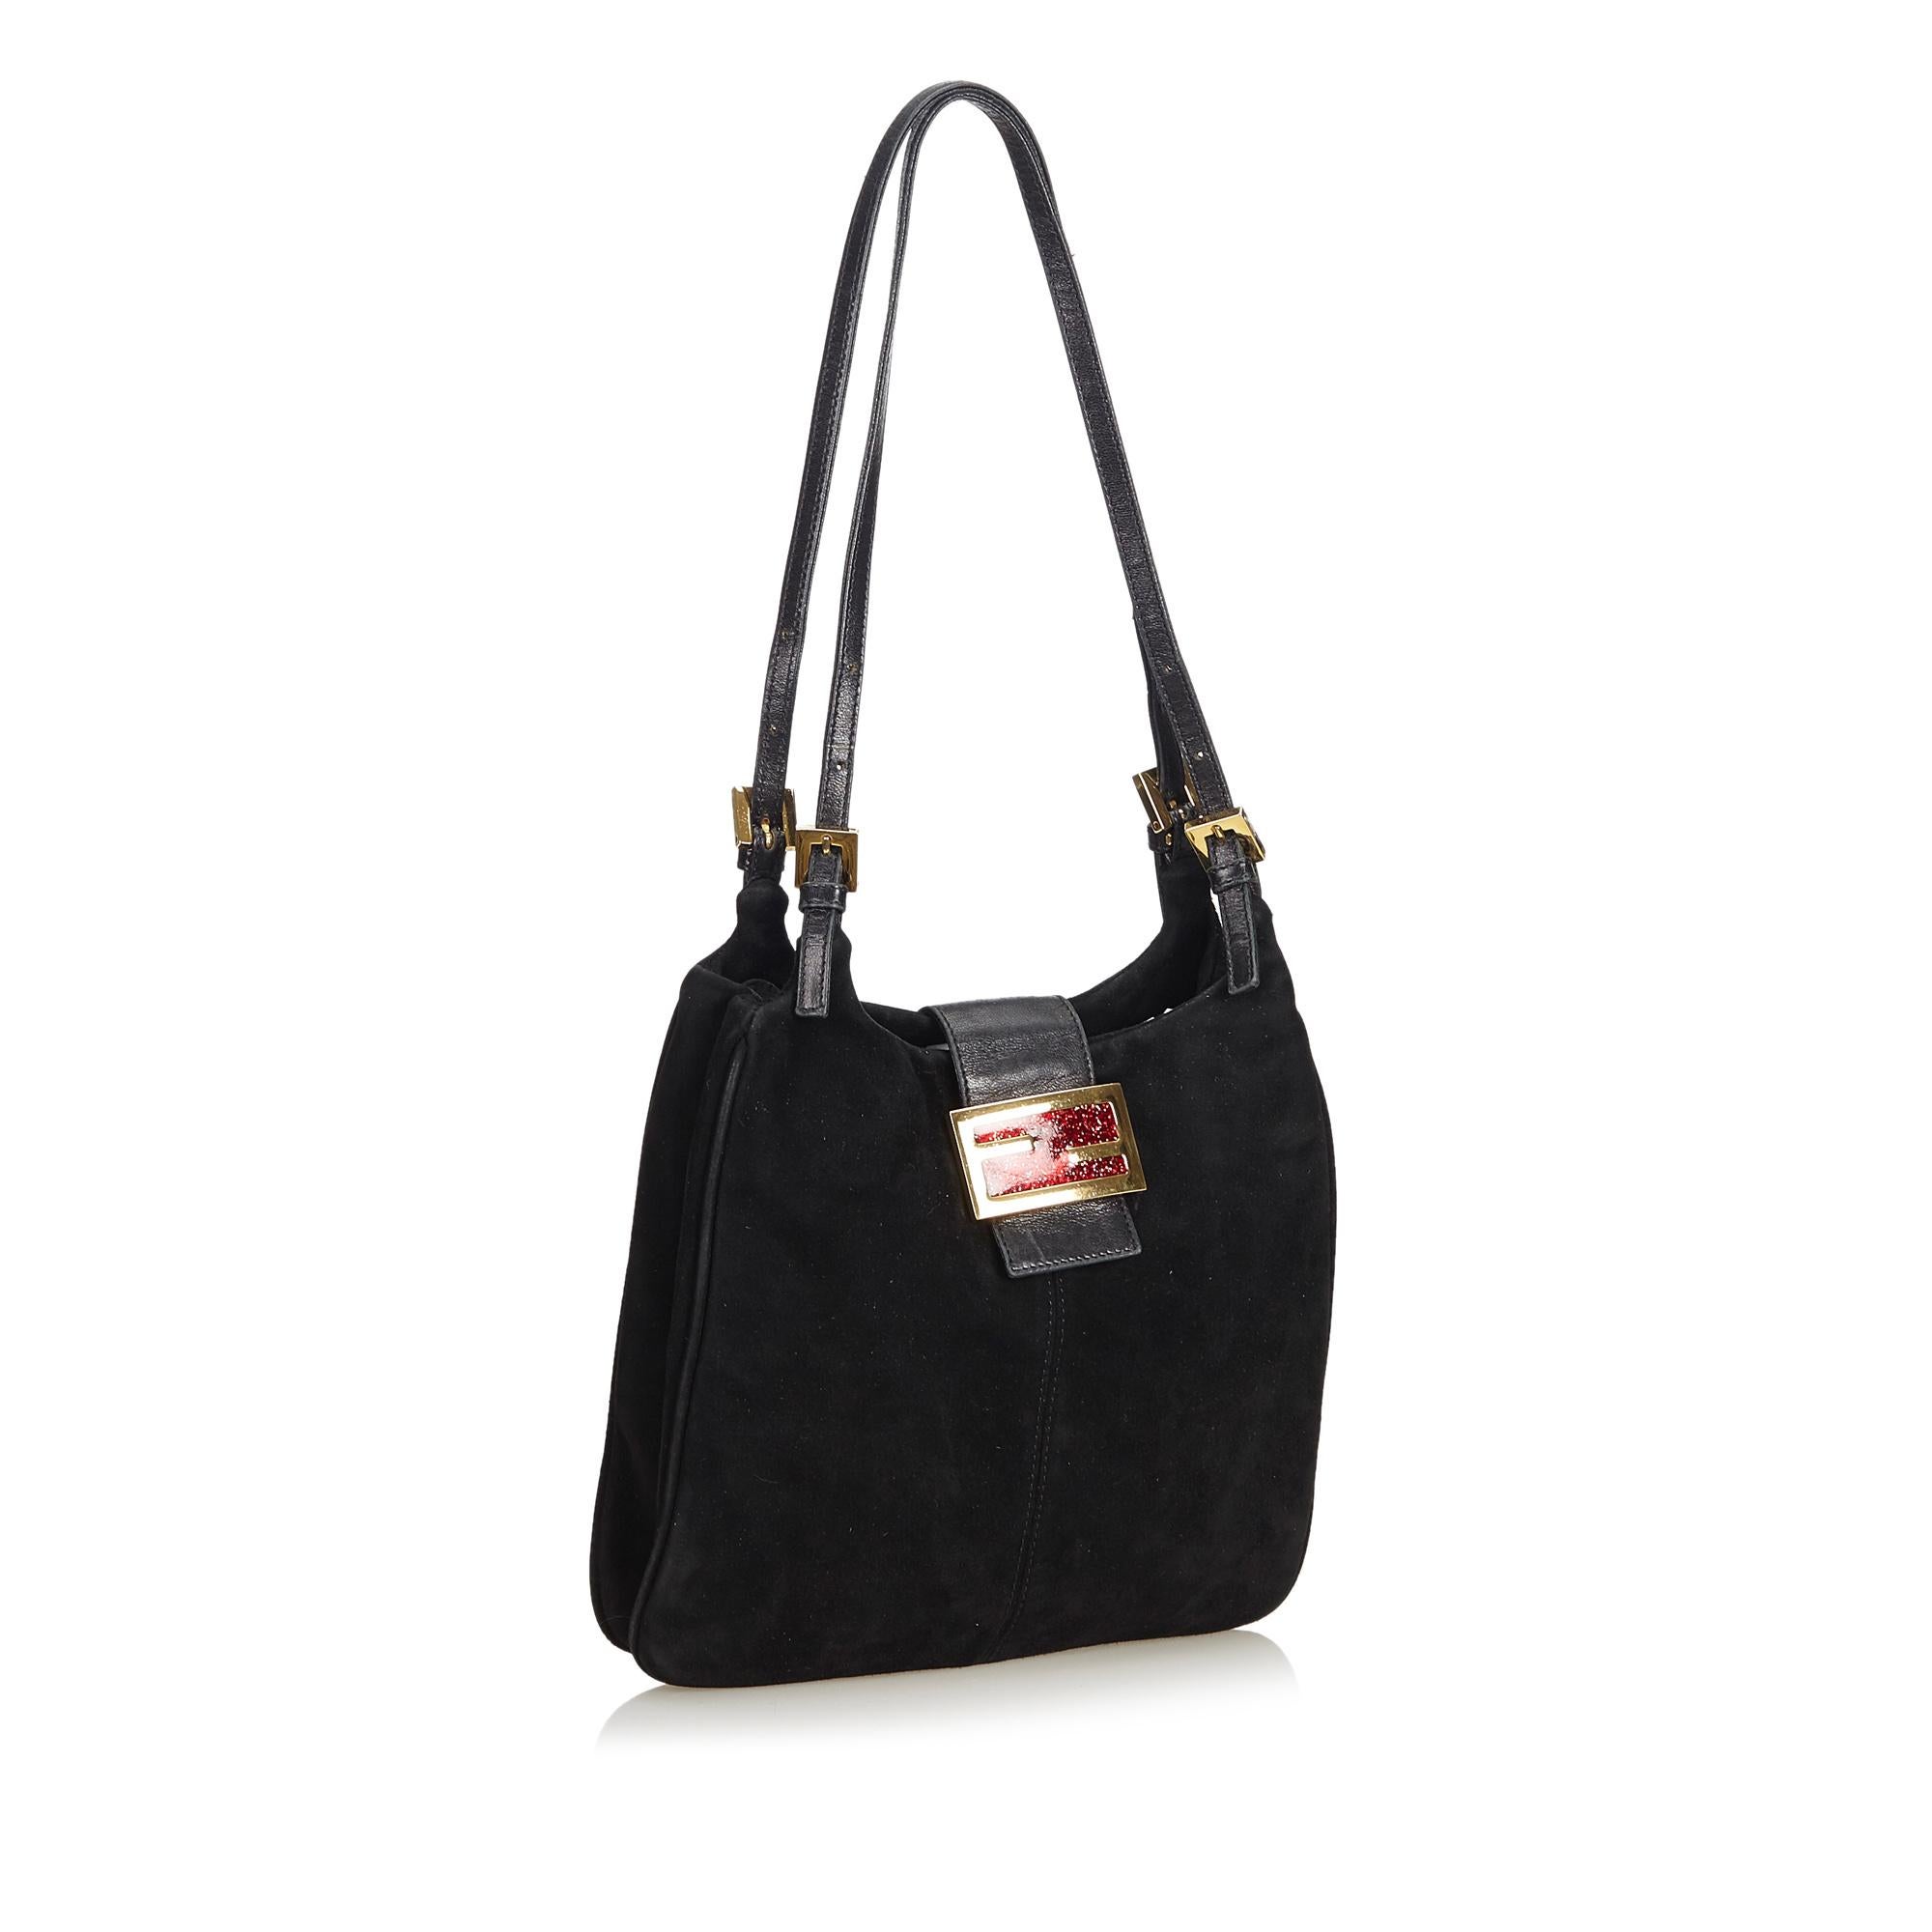 This shoulder bag features a suede body, flat leather straps, open top with flat leather strap and magnetic closure, and an interior zip pocket. It carries as B condition rating.

Inclusions: 
This item does not come with